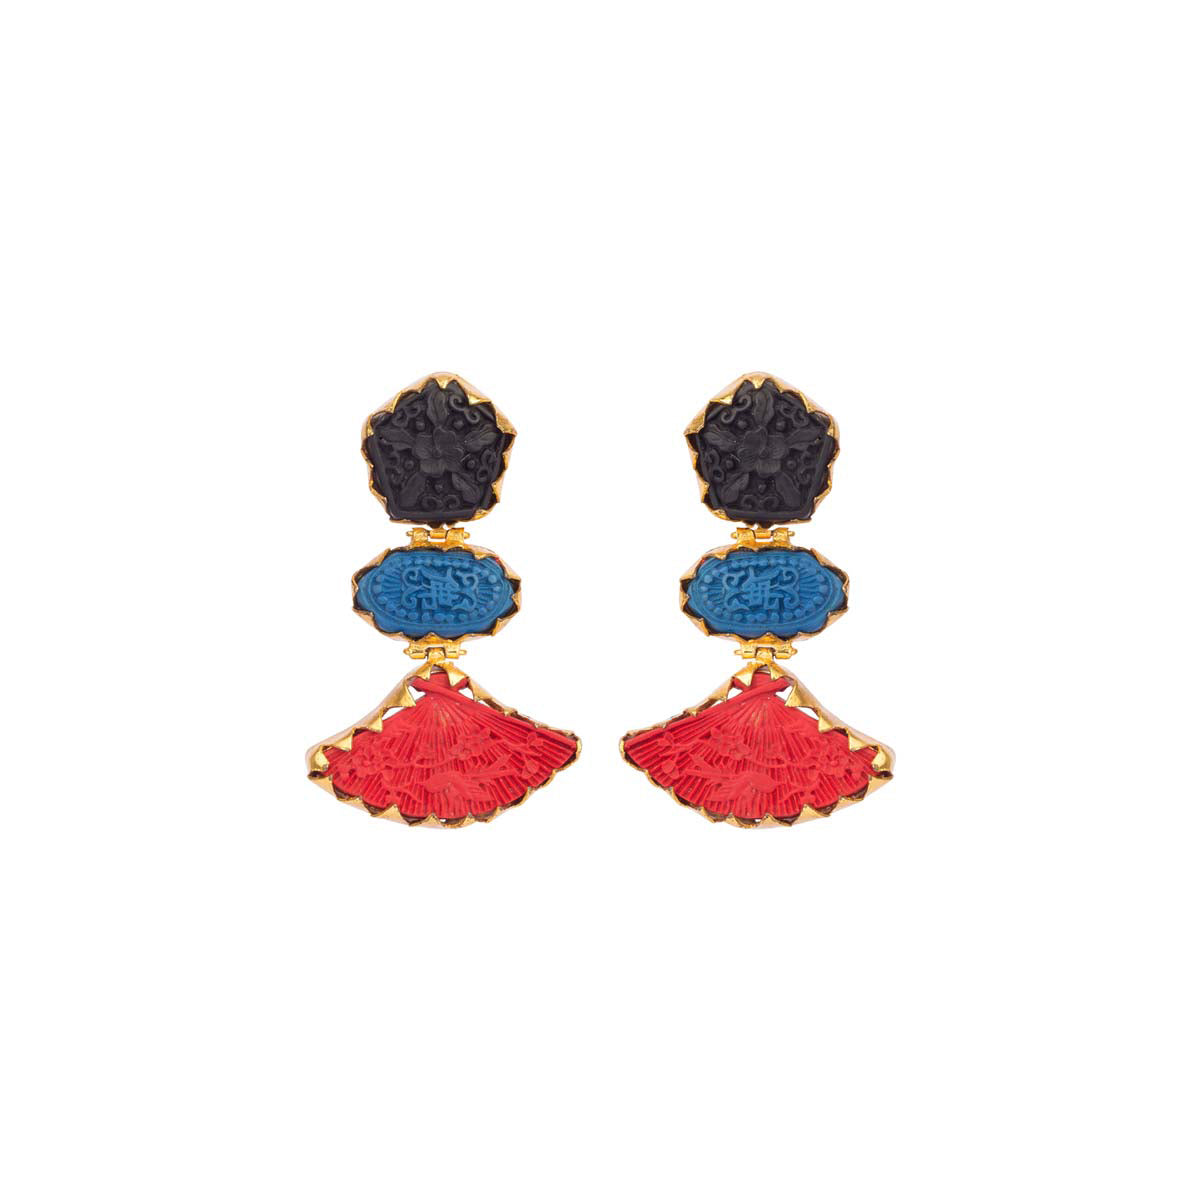 These tiered tri-colour earrings with engraved filigree are casual and carefree as they are classic and cool.